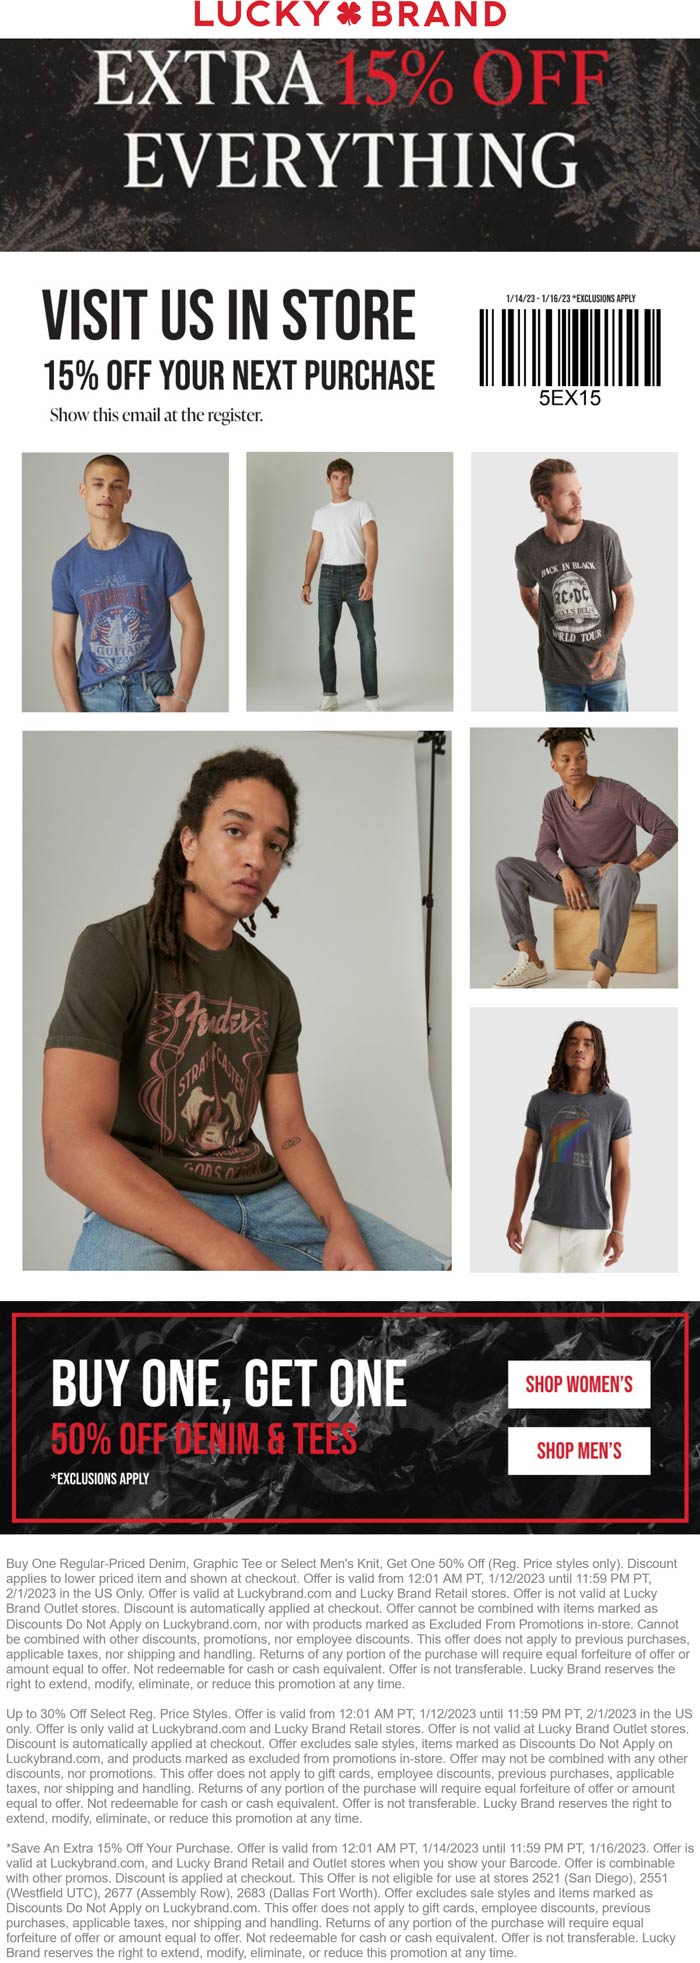 Lucky Brand stores Coupon  15% off everything + second jeans 50% off at Lucky Brand, ditto online #luckybrand 